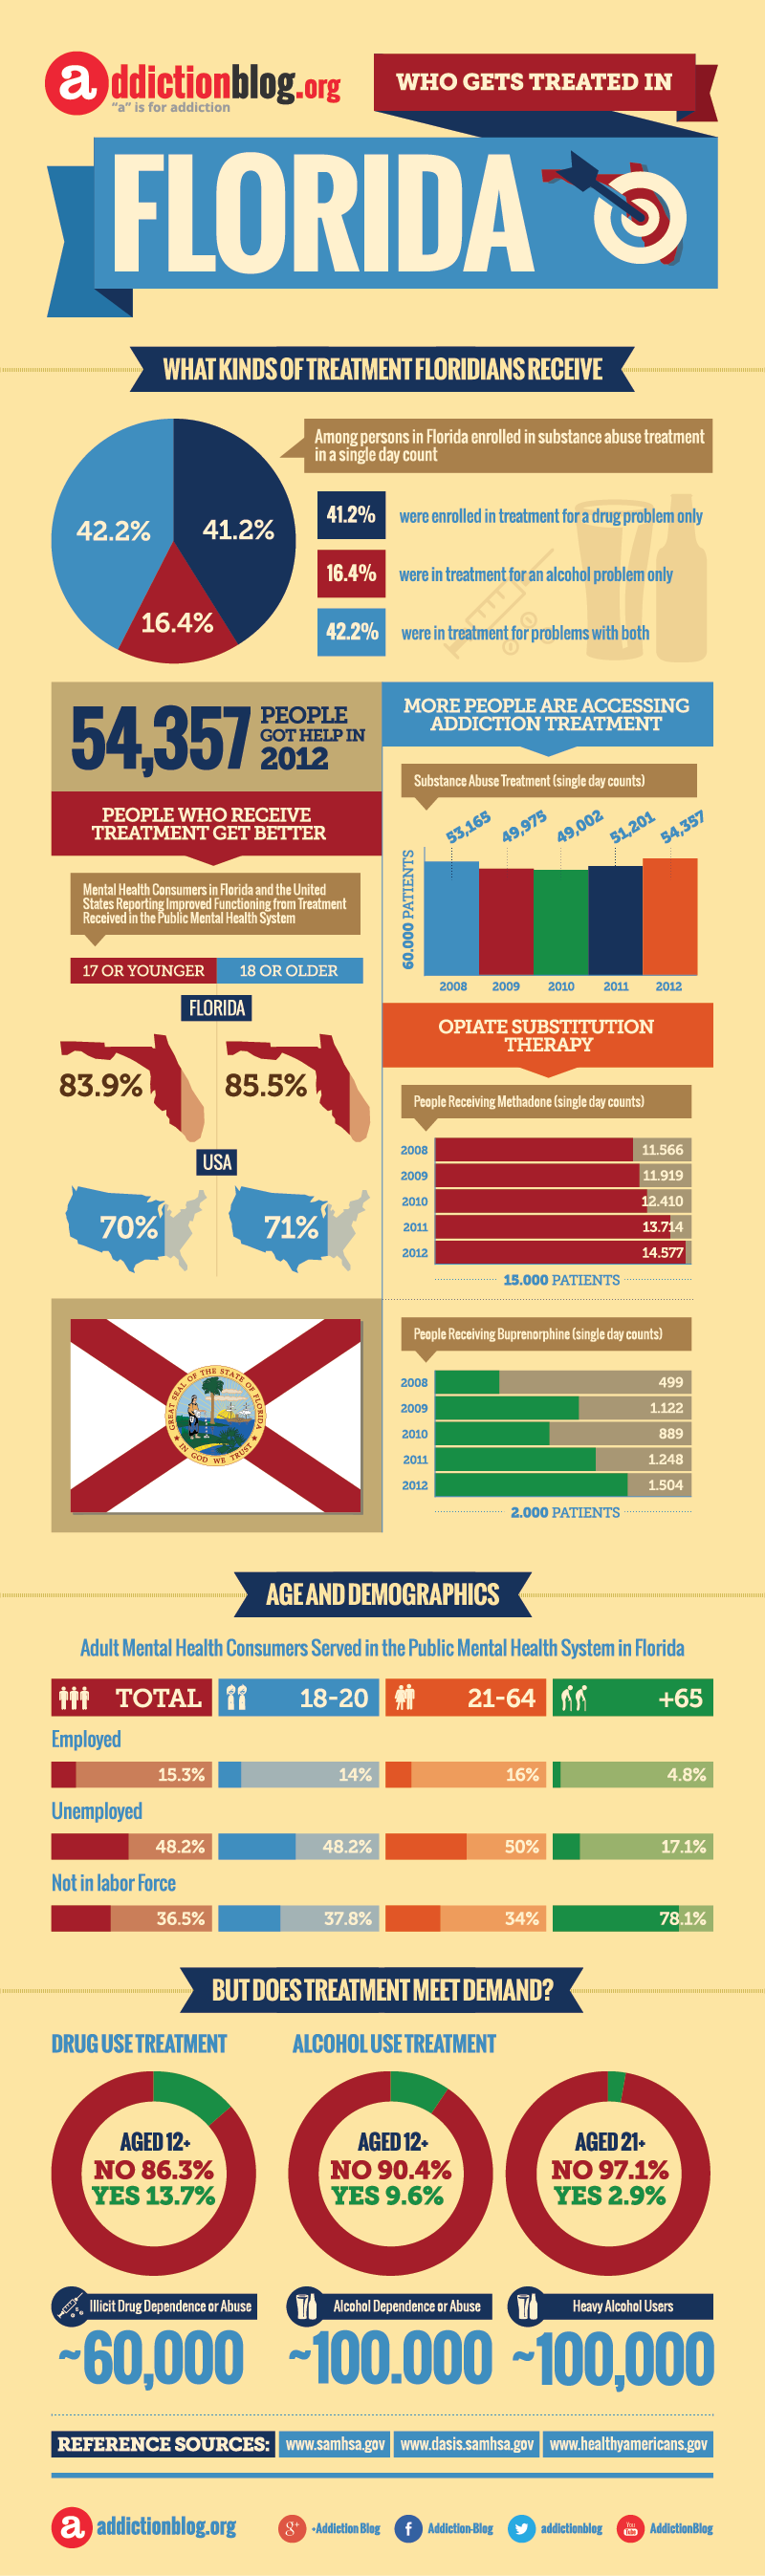 Rehab facilities in Florida: Who’s getting treatment in FL? (INFOGRAPHIC)